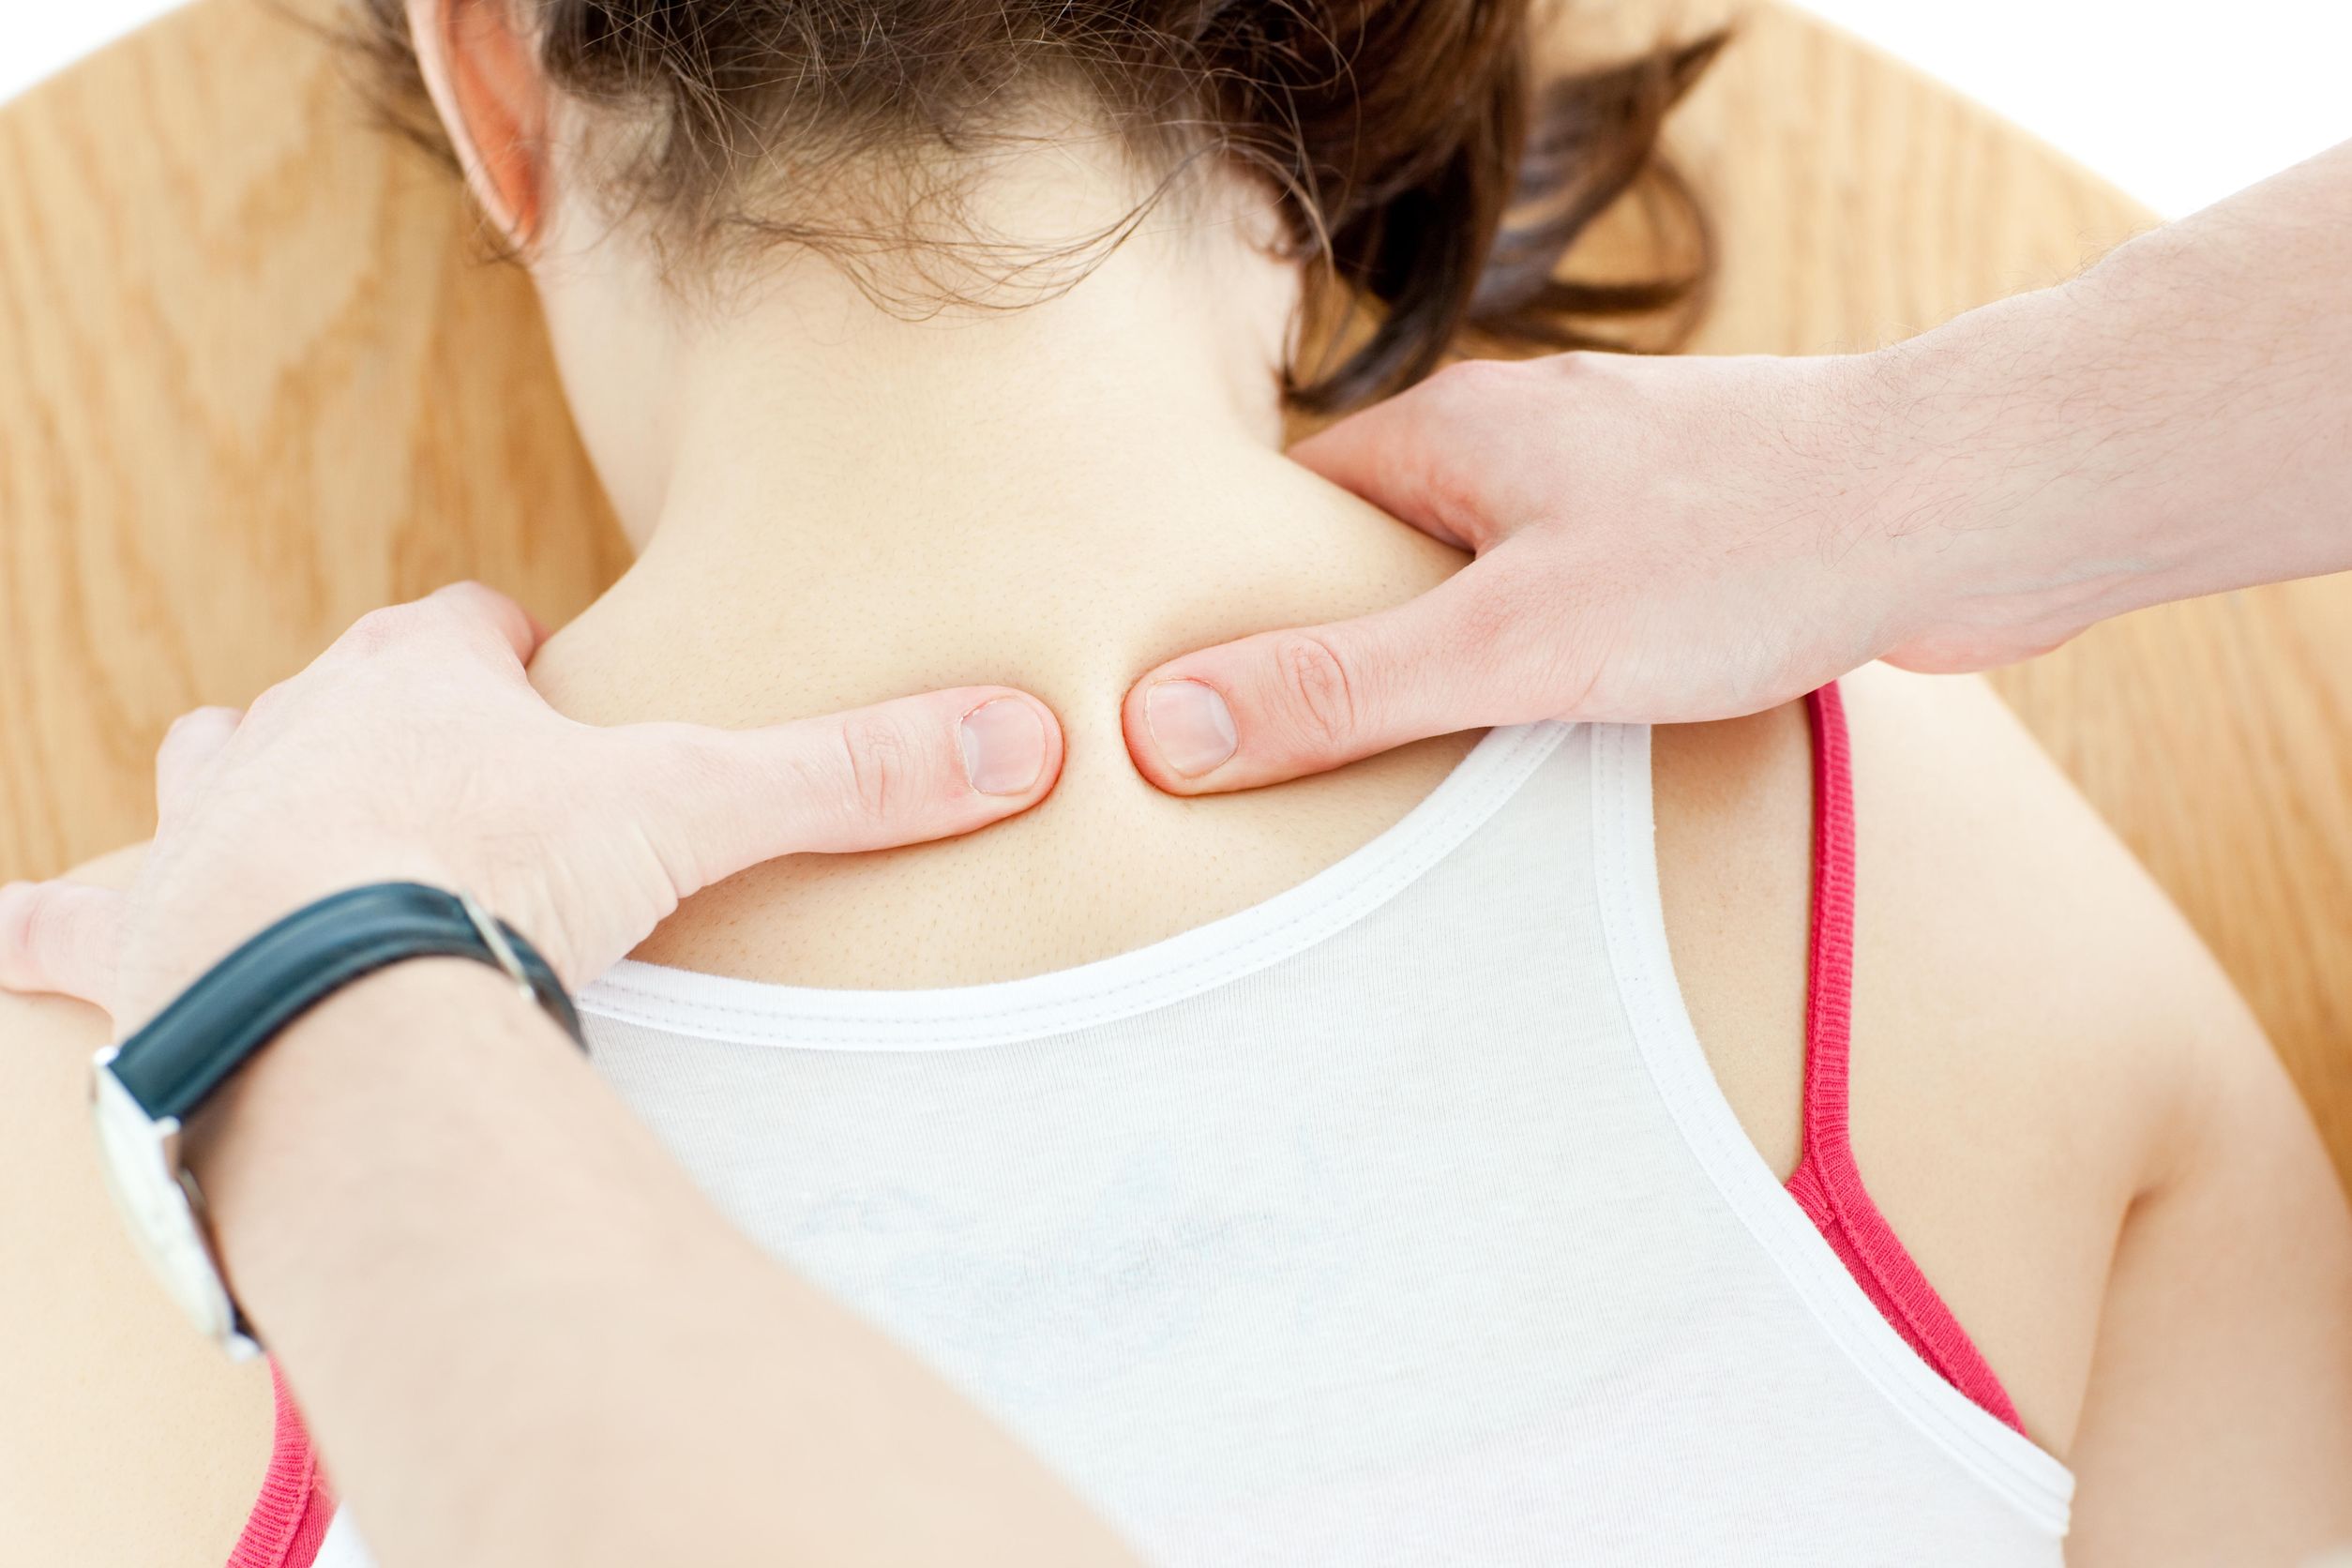 Seeking Physical Therapy in Edmonton, AB is an Important Part of Recovery